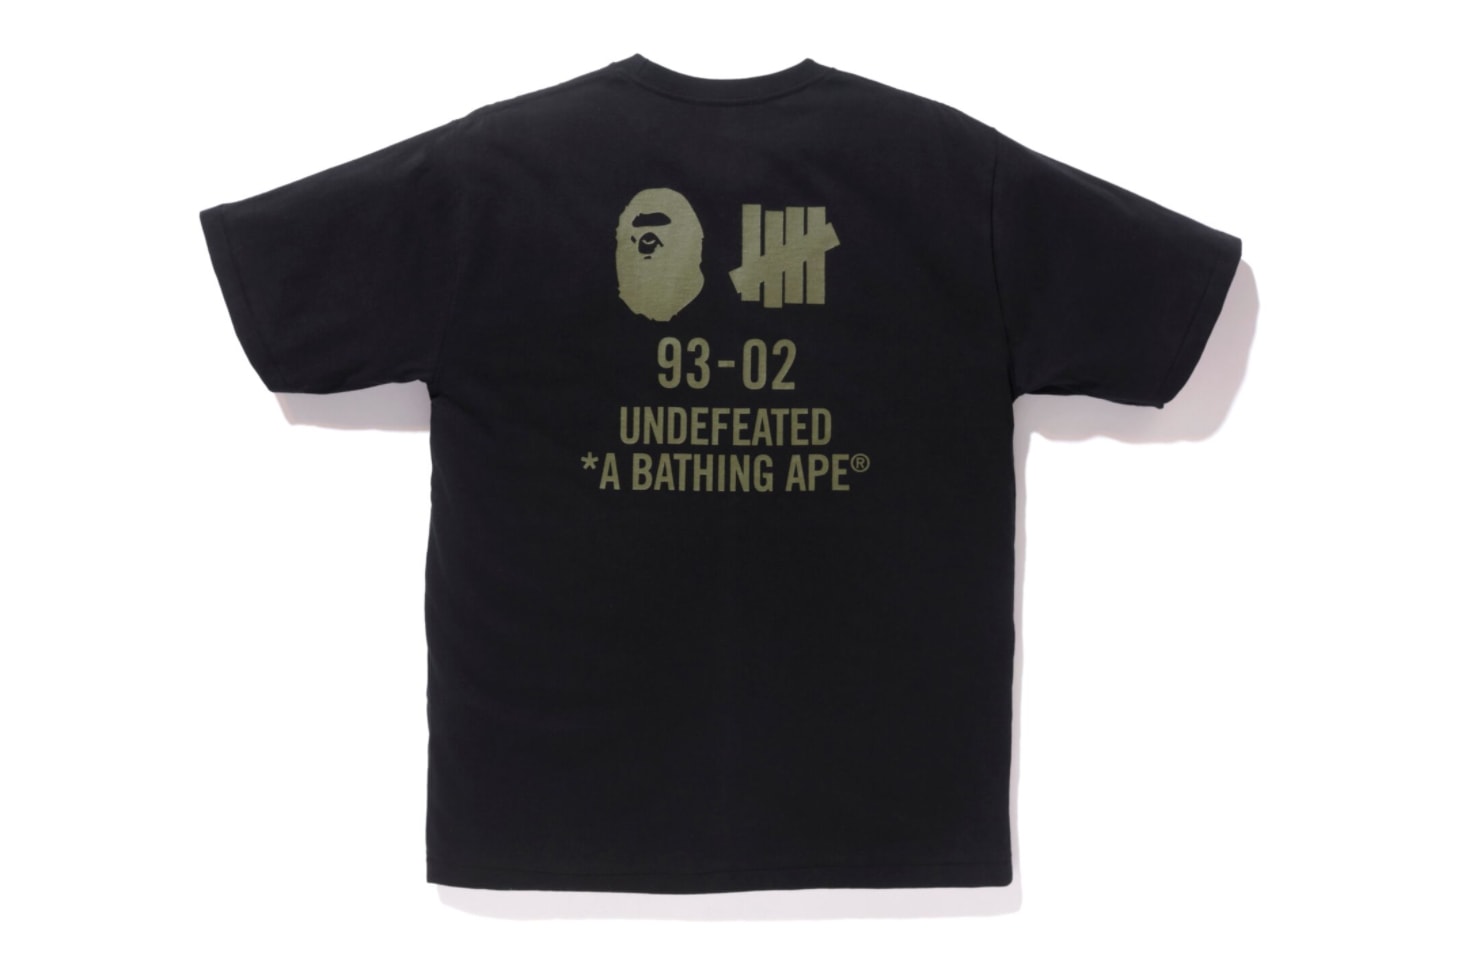 UNDEFEATED BAPE A Bathing Ape Fall/Winter 2017 Collection